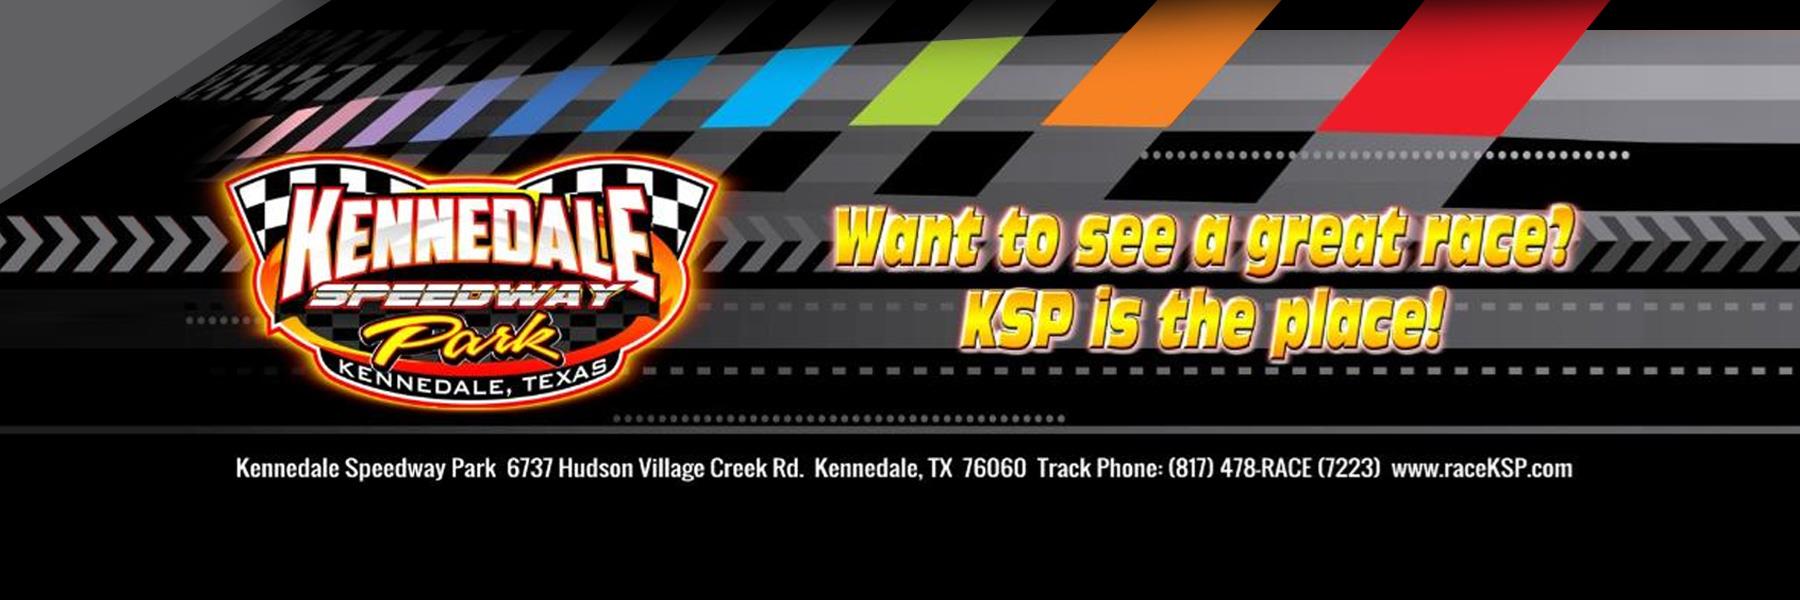 6/27/2020 - Kennedale Speedway Park